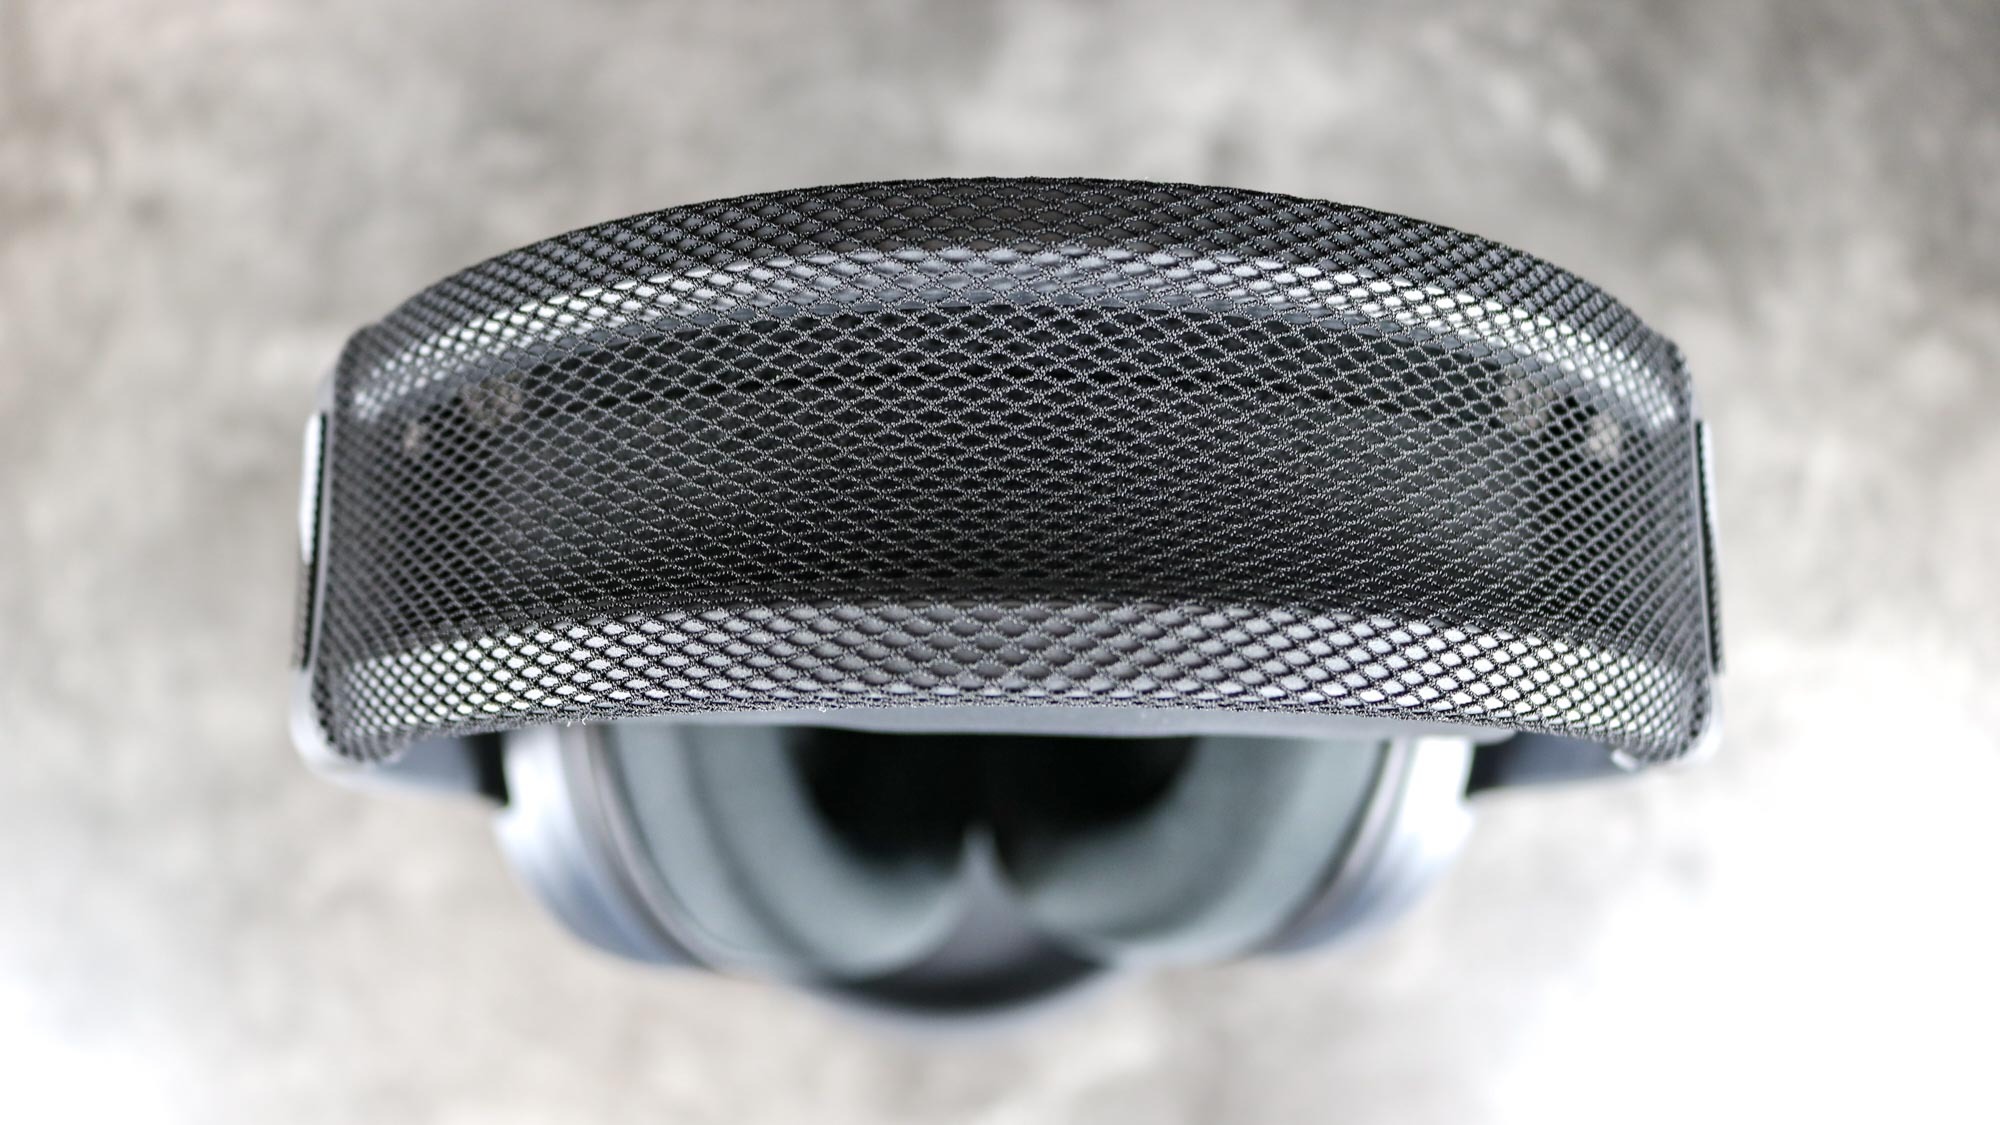 An overhead view of the Turtle Beach Atlas Air headset showing its mesh headband